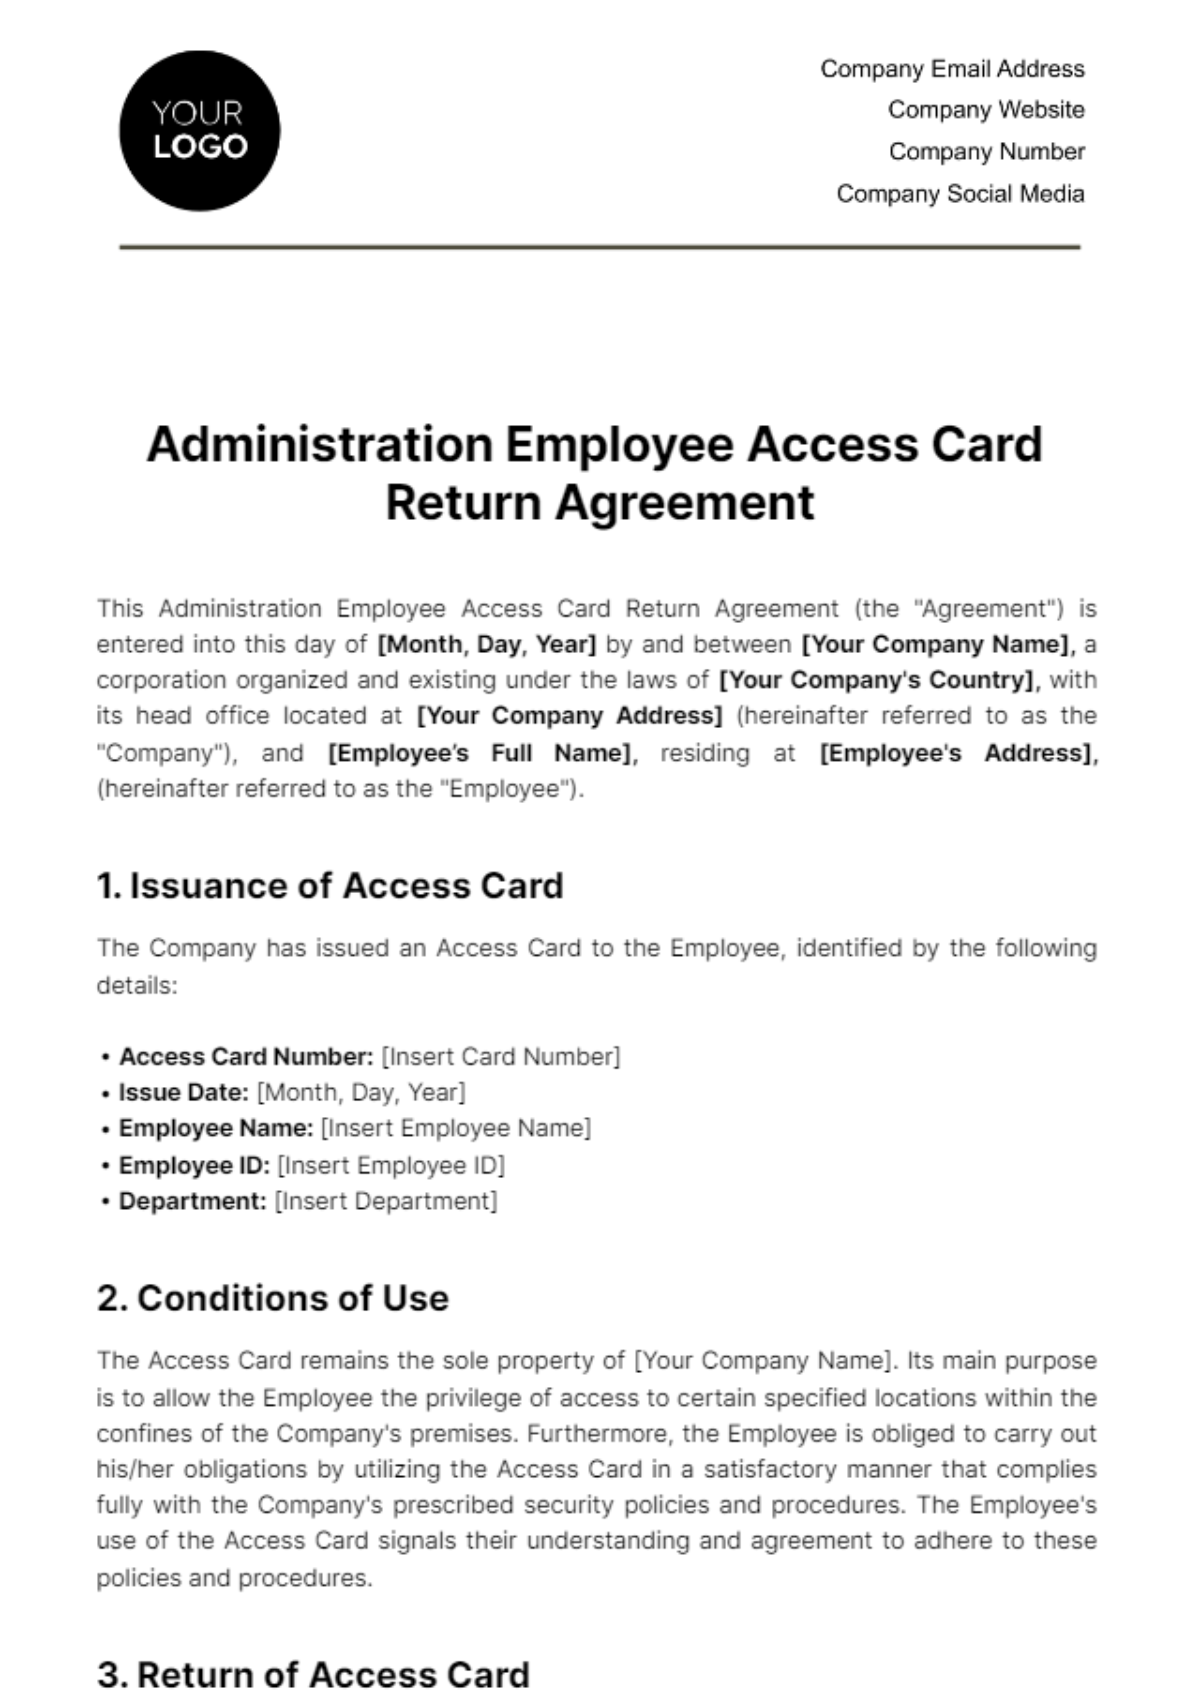 Administration Employee Access Card Return Agreement Template